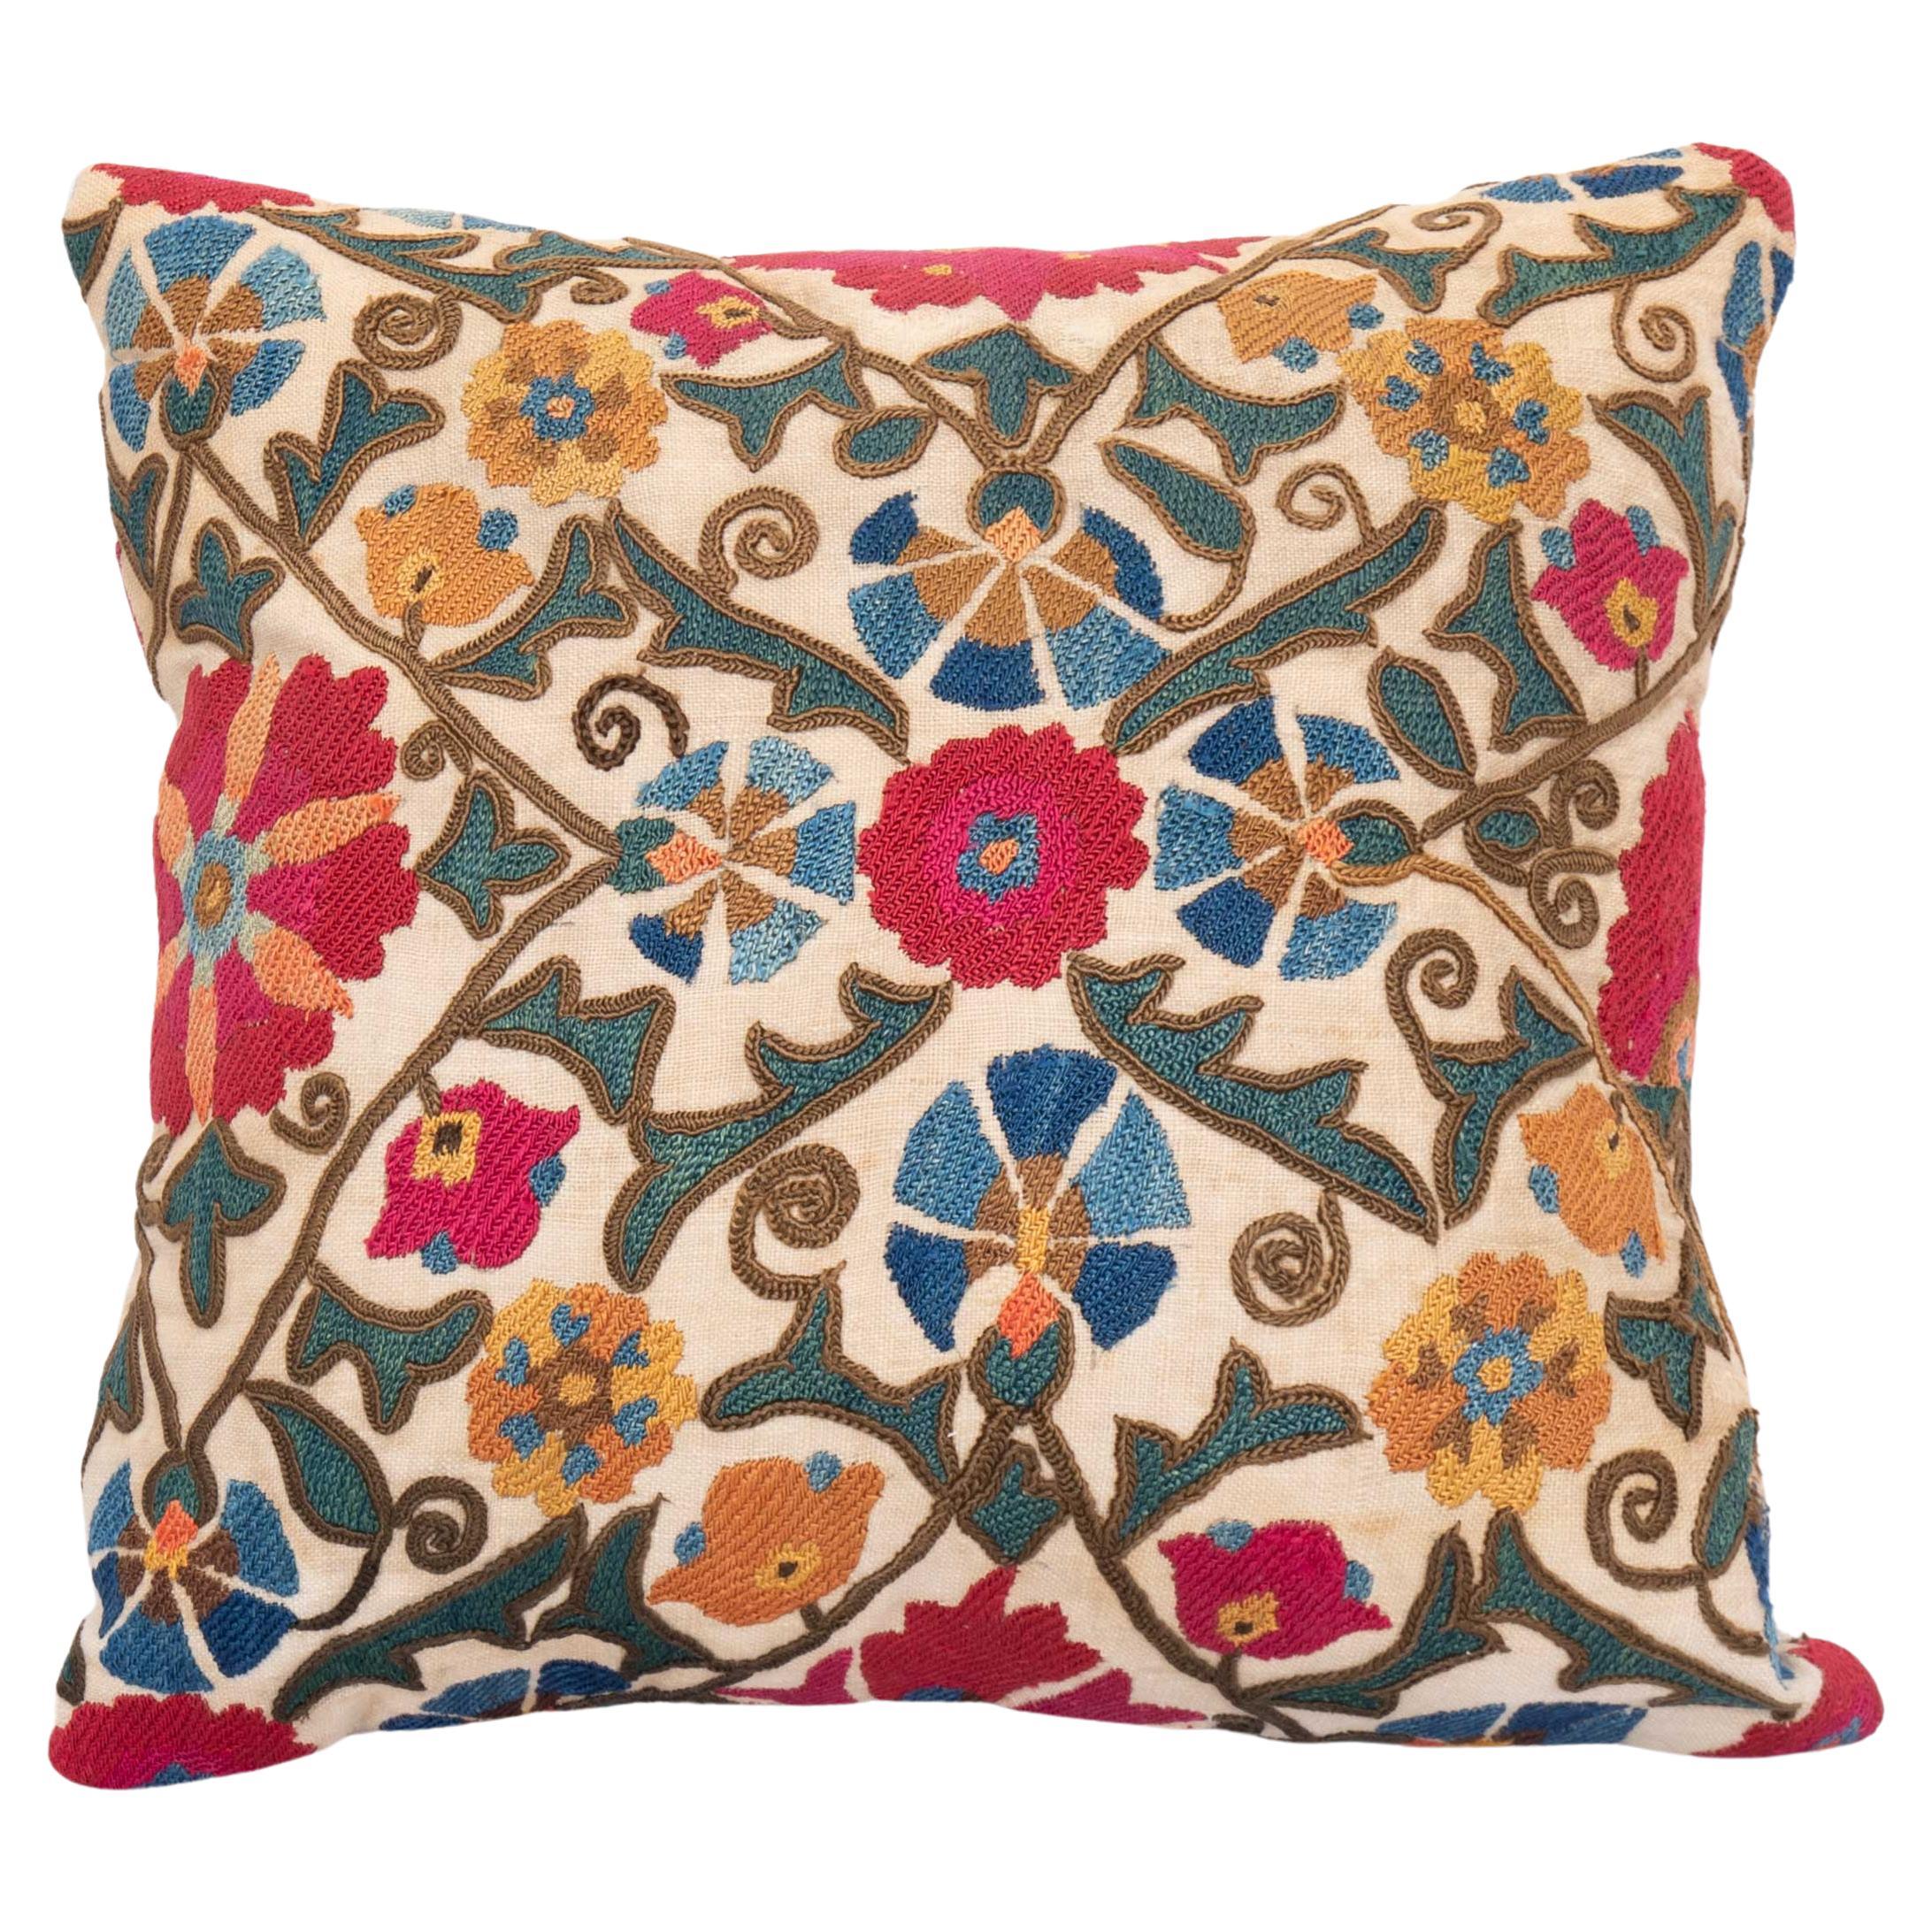 Suzani Pillow Case Made from Antique Suzani Fragment, 19th C